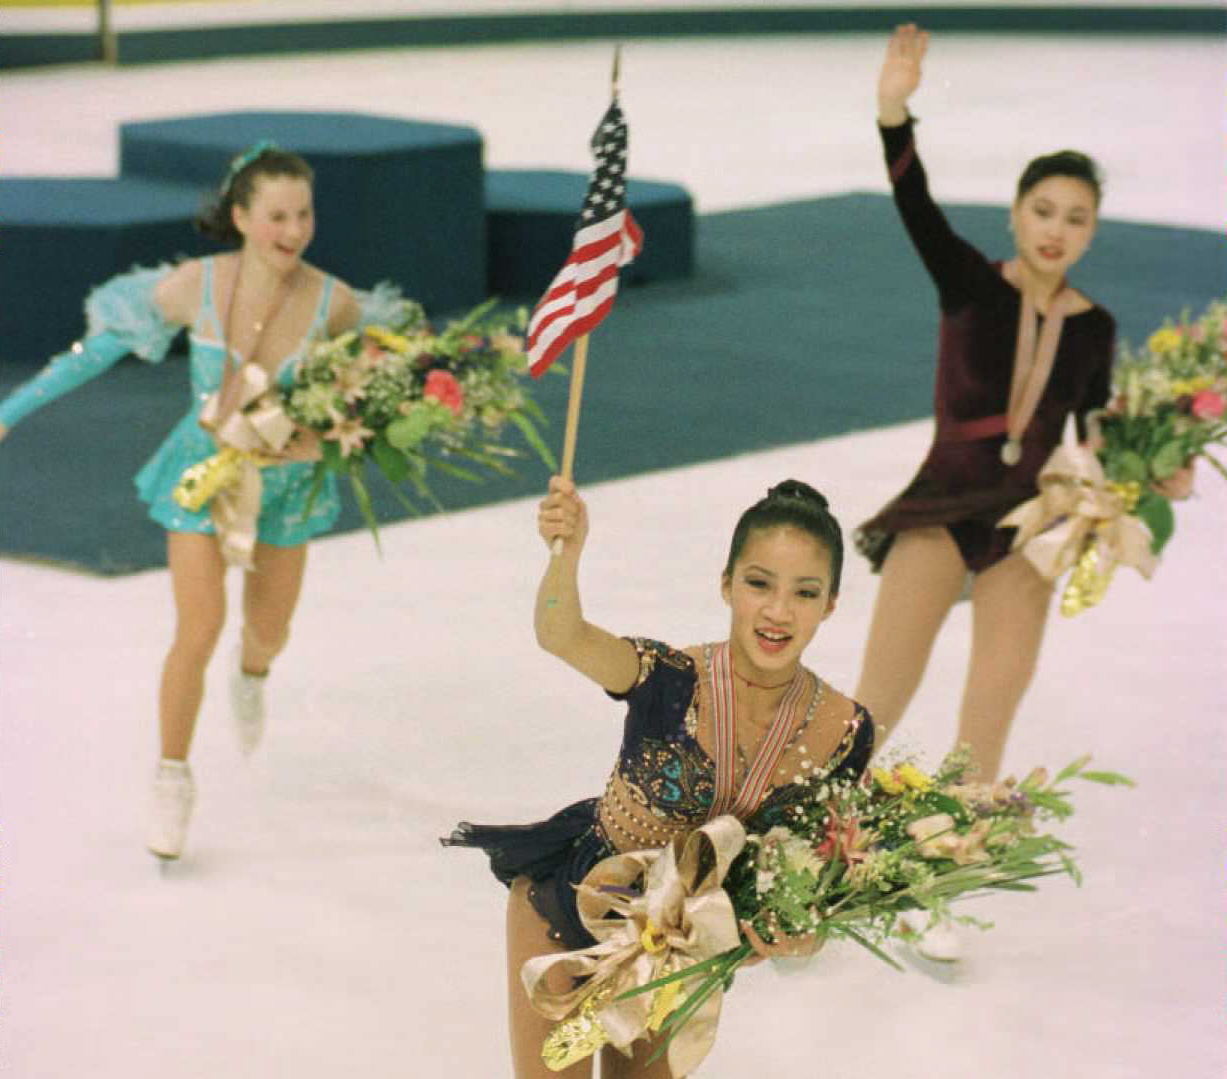 Michelle Kwan leads the podium in 1996, her first of what would be five World Championship titles.